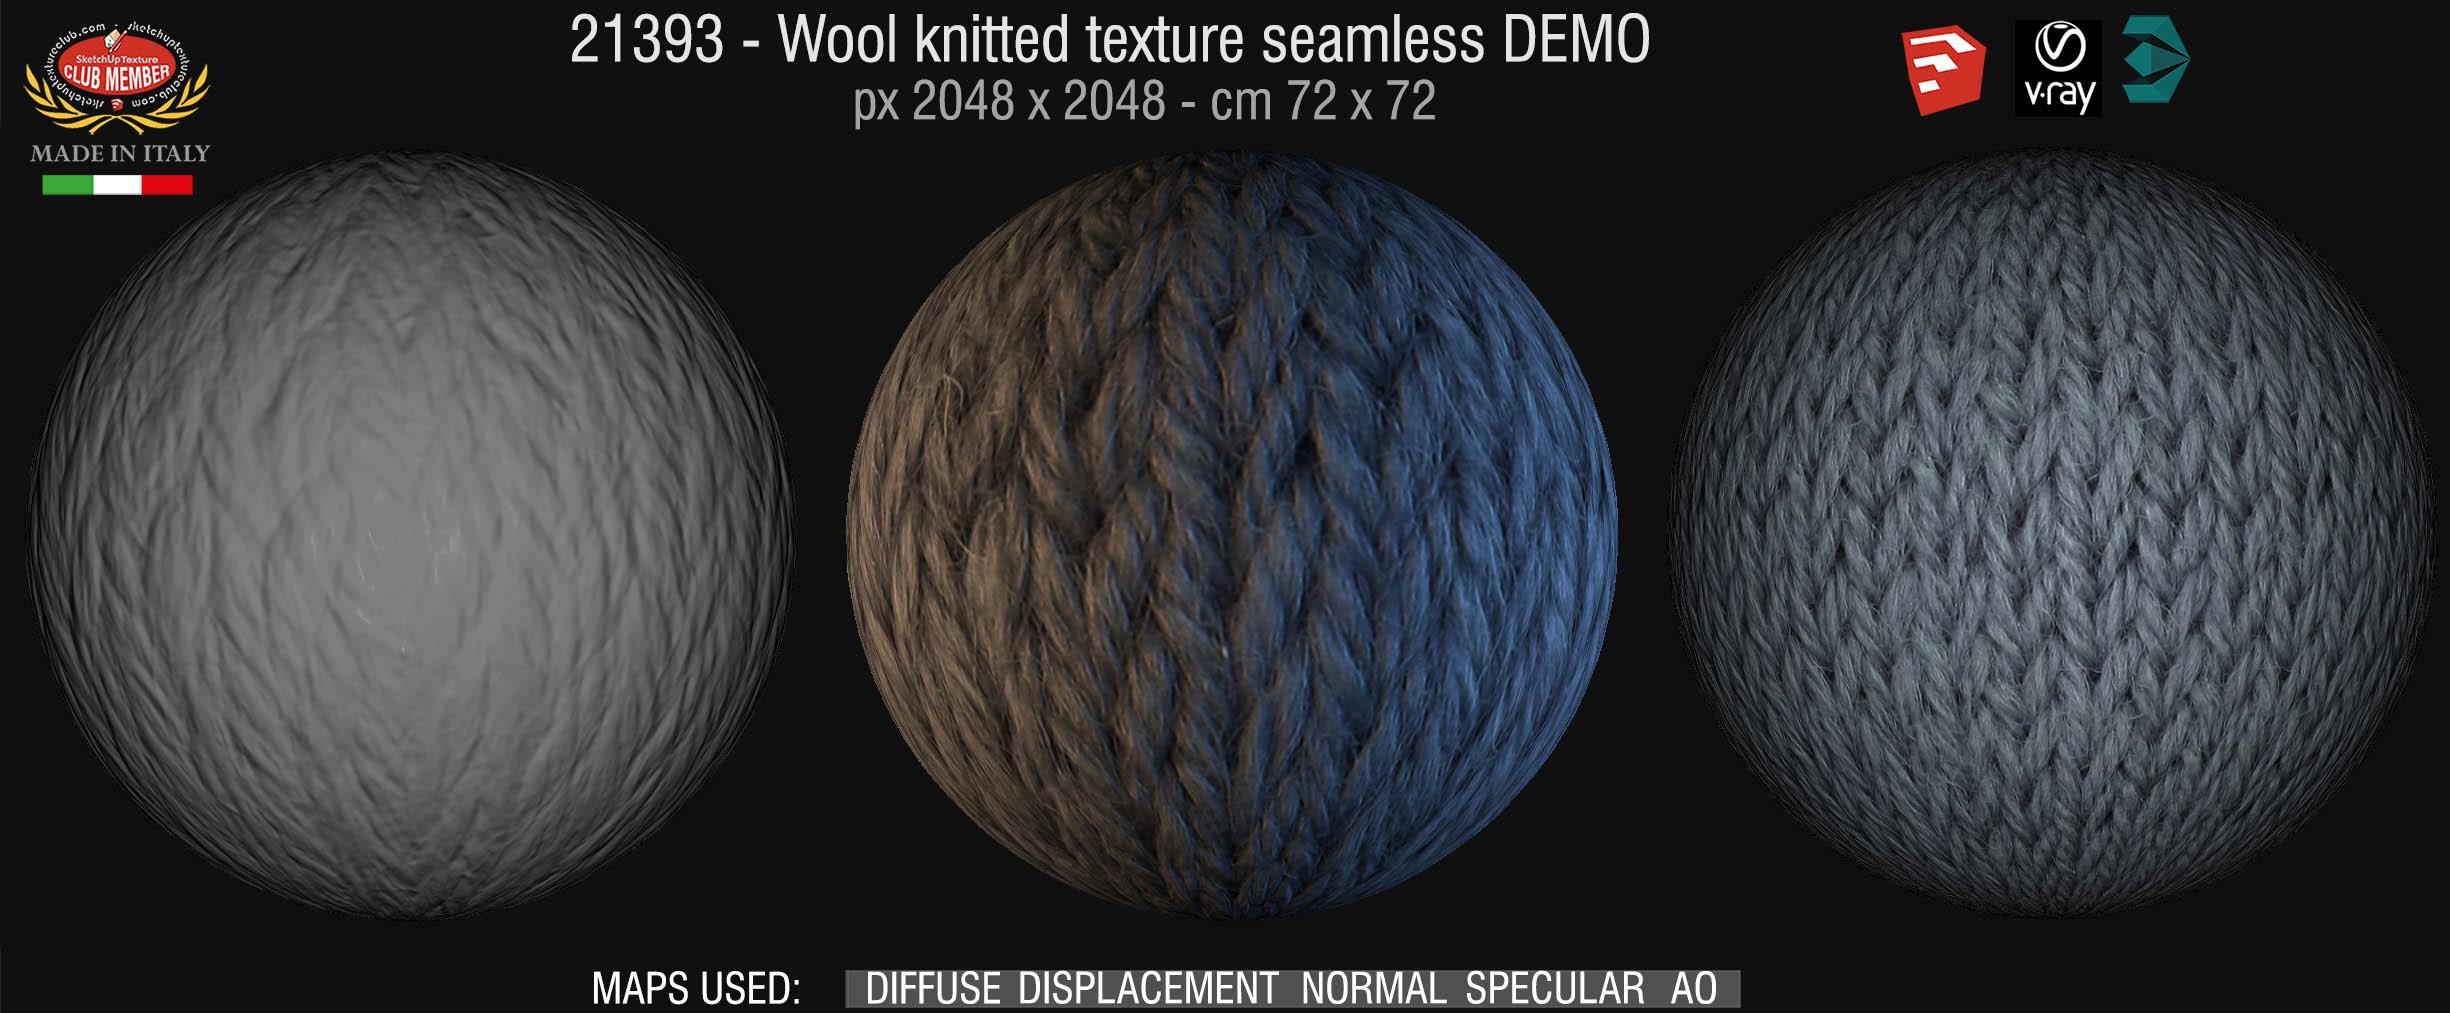 21393 wool knitted texture seamless + maps DEMO